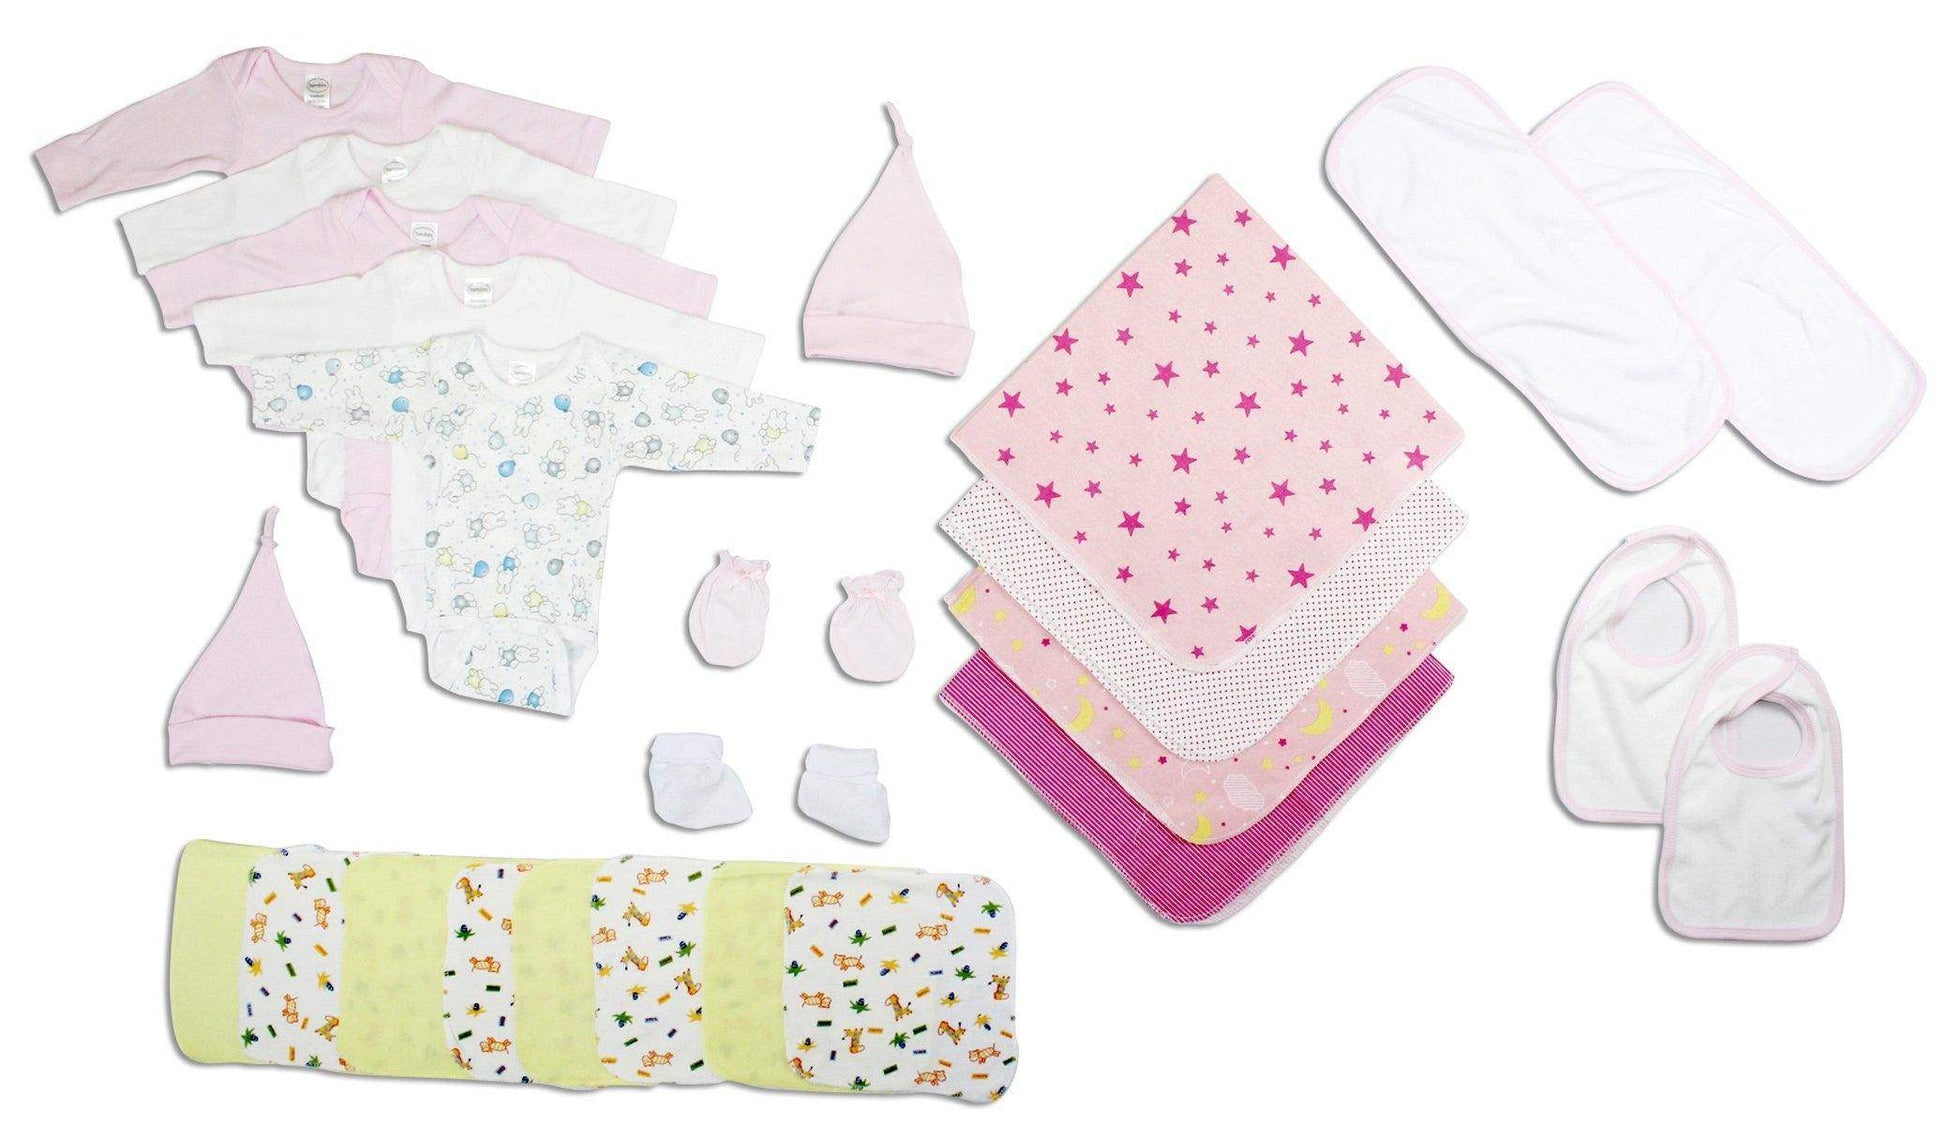 Bambini Newborn Baby Girls 25 Pc Layette Baby Shower Gift Set (NB)-Bambini-Baby Clothes,Baby Clothing Set,Baby Gown,Layette Sets